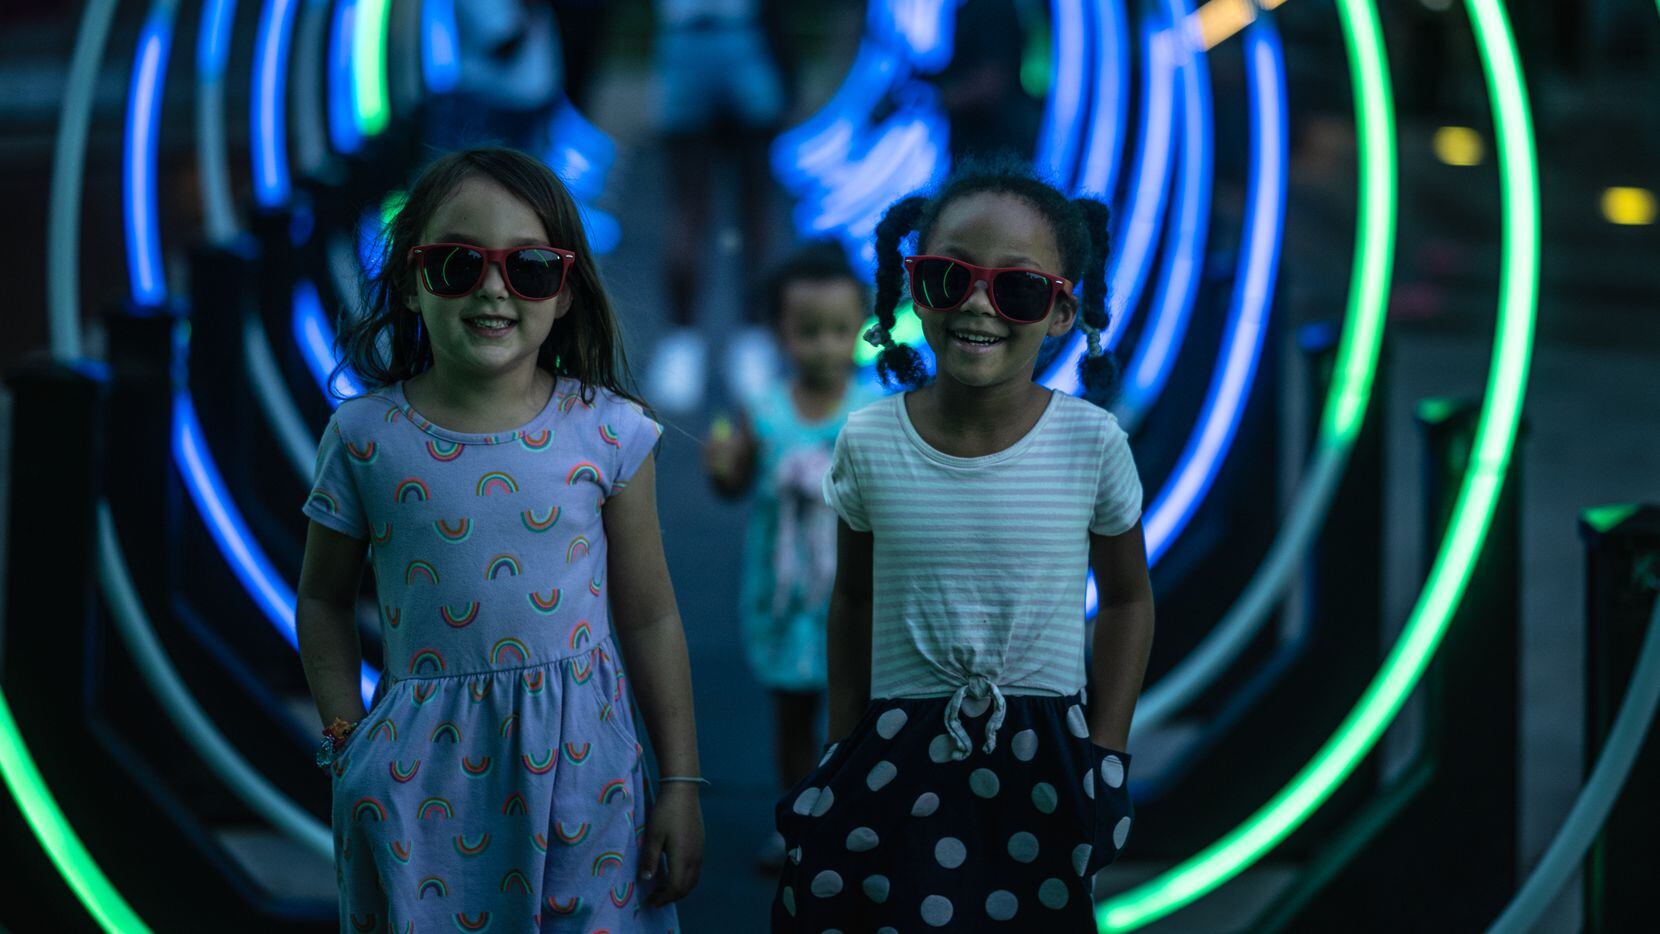 The "Passage" immersive exhibit is open to the public through Nov. 3, 2021, at Main Street Garden in Downtown Dallas.